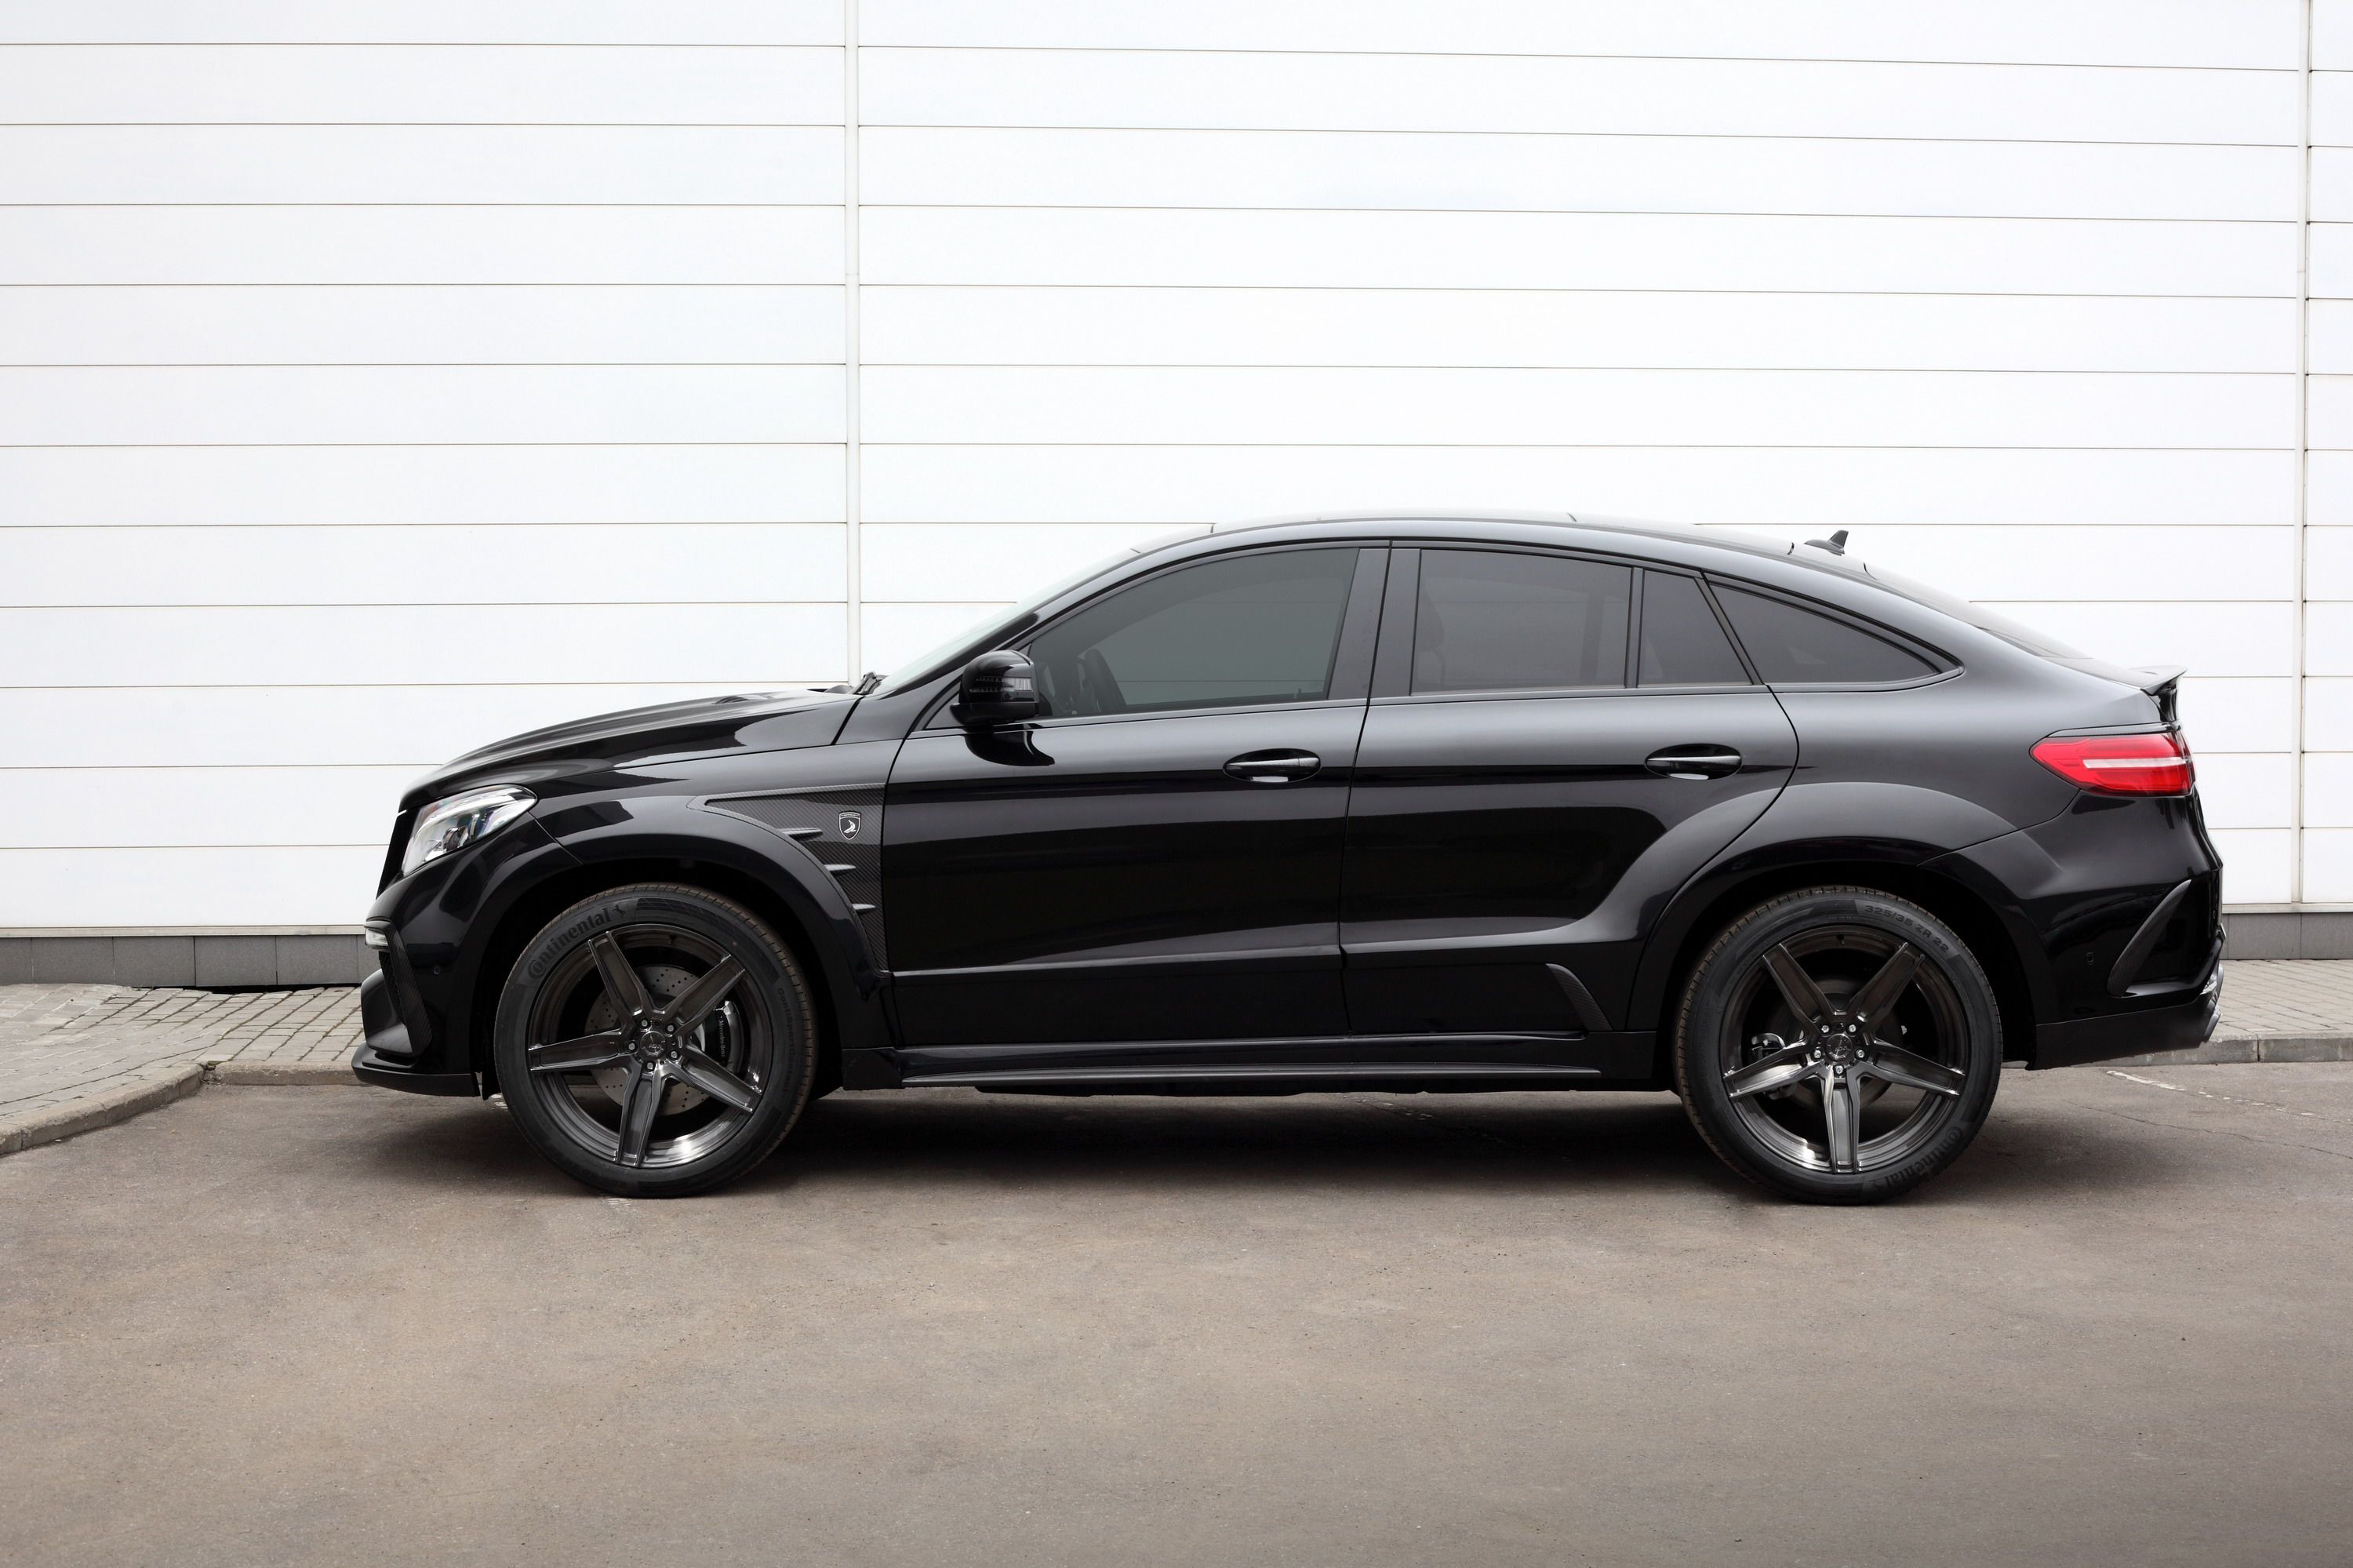 2016 Mercedes-Benz GLE Coupe Inferno by TopCar